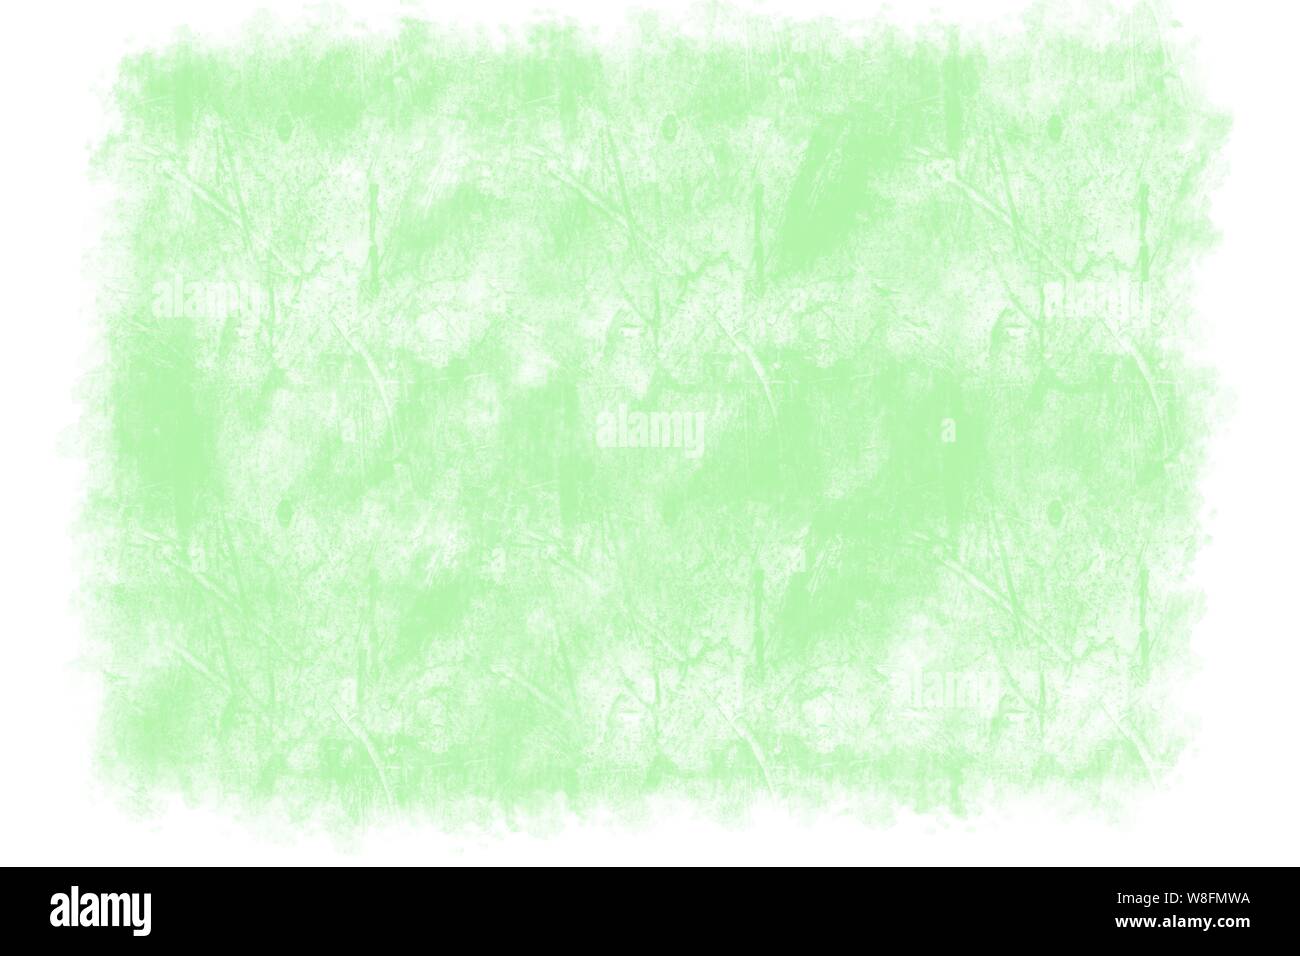 neon green hand drawn rough cement wall tile background pattern with irregular white border Stock Photo